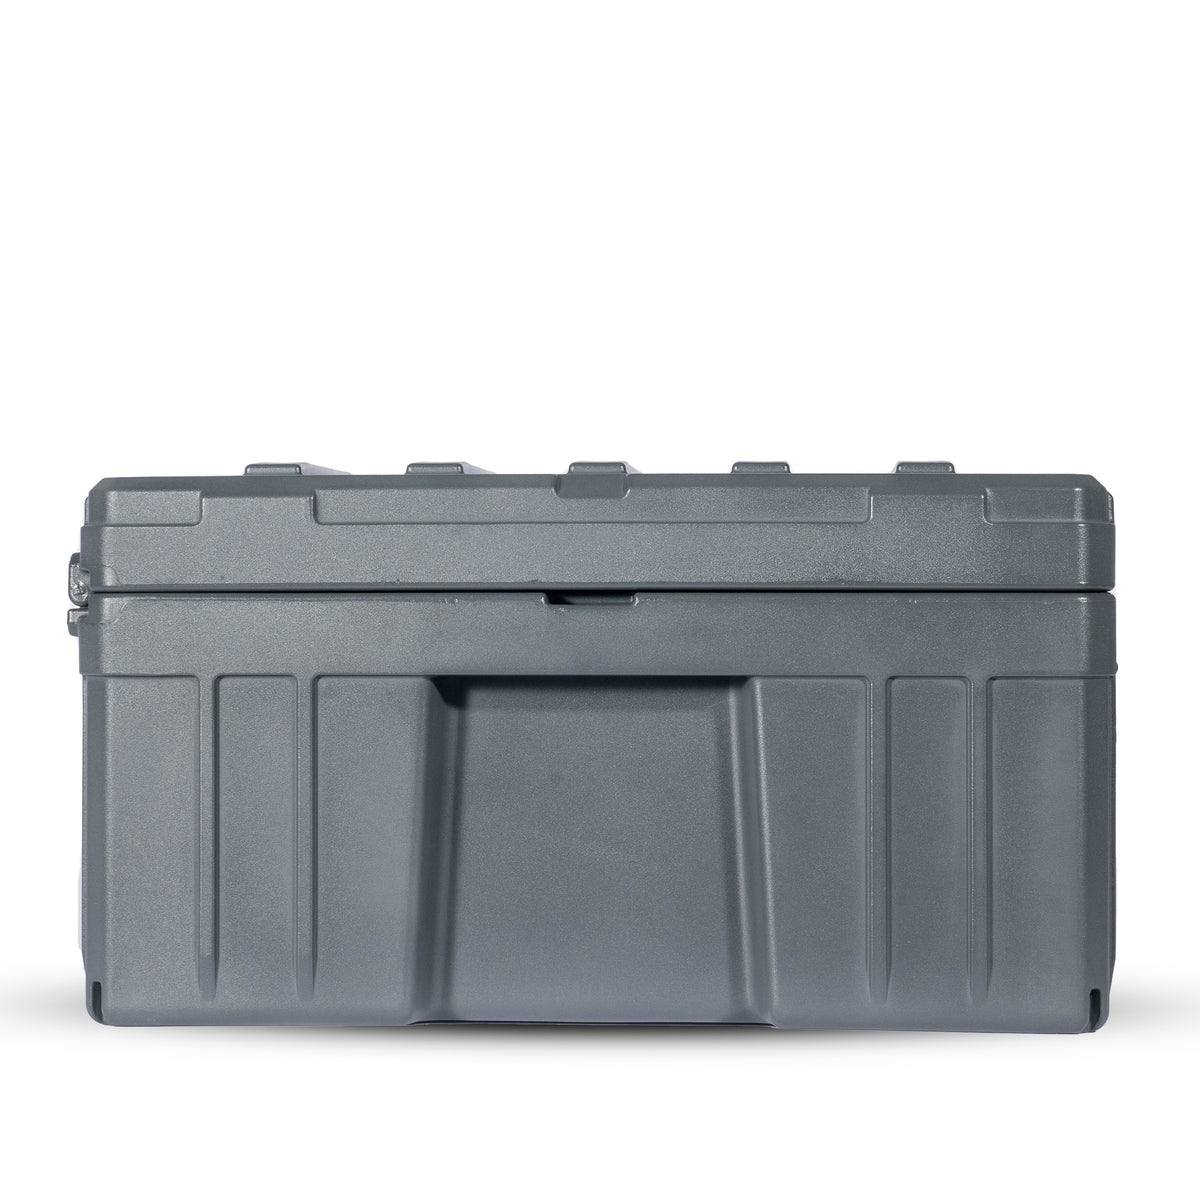 86L RUGGED CASE - BaseCamp Provisions